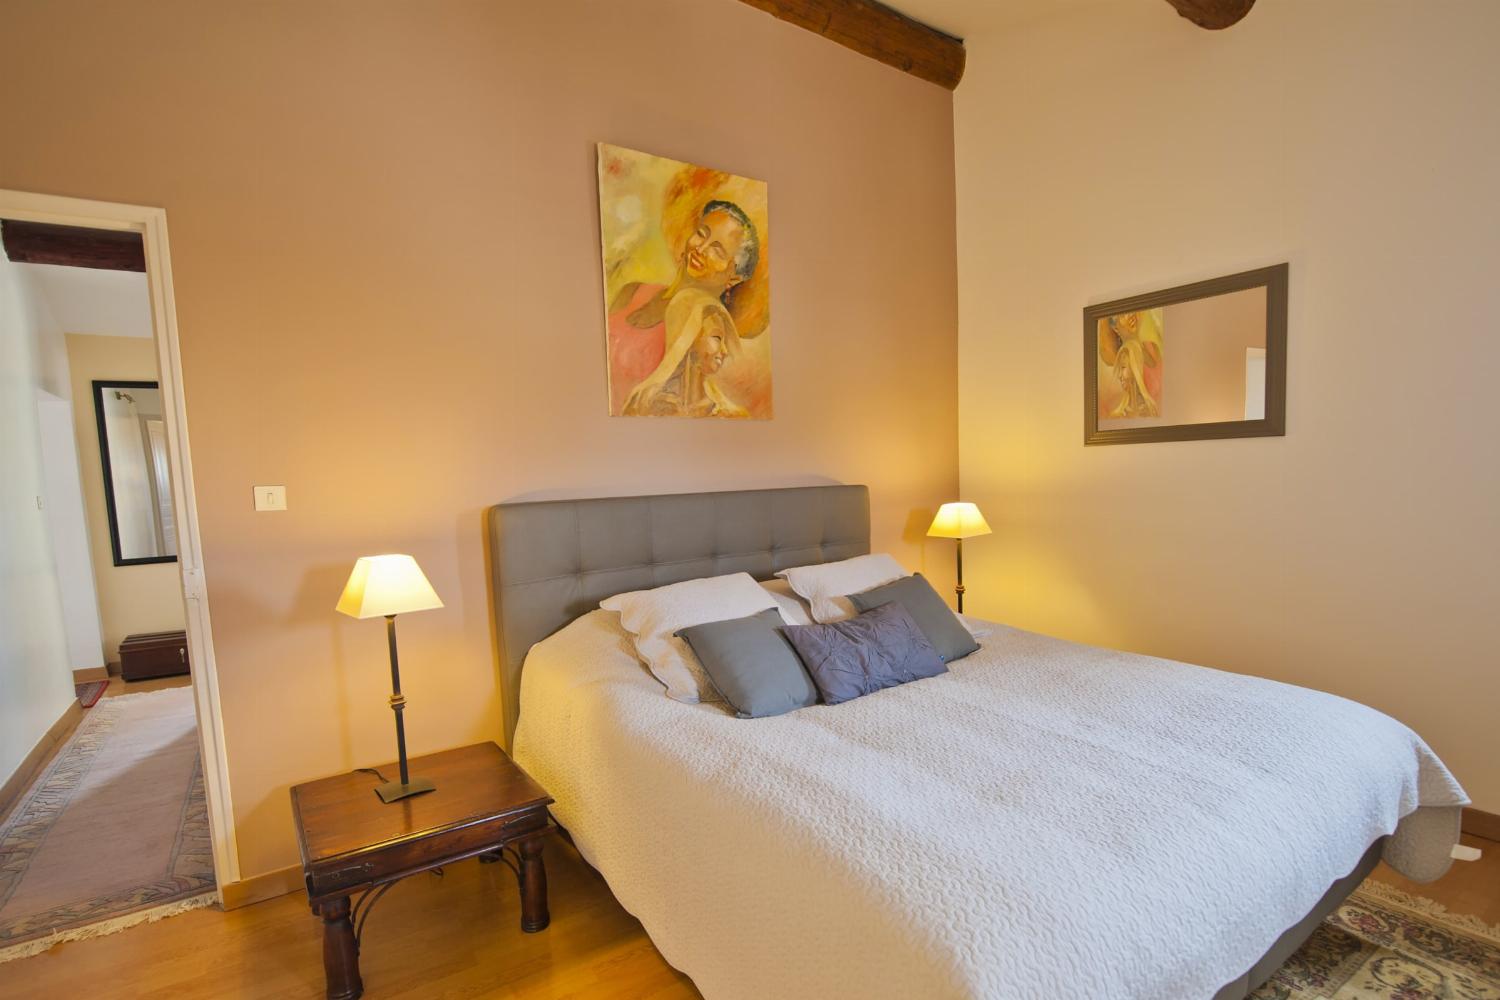 Bedroom | Rental accommodation in Provence